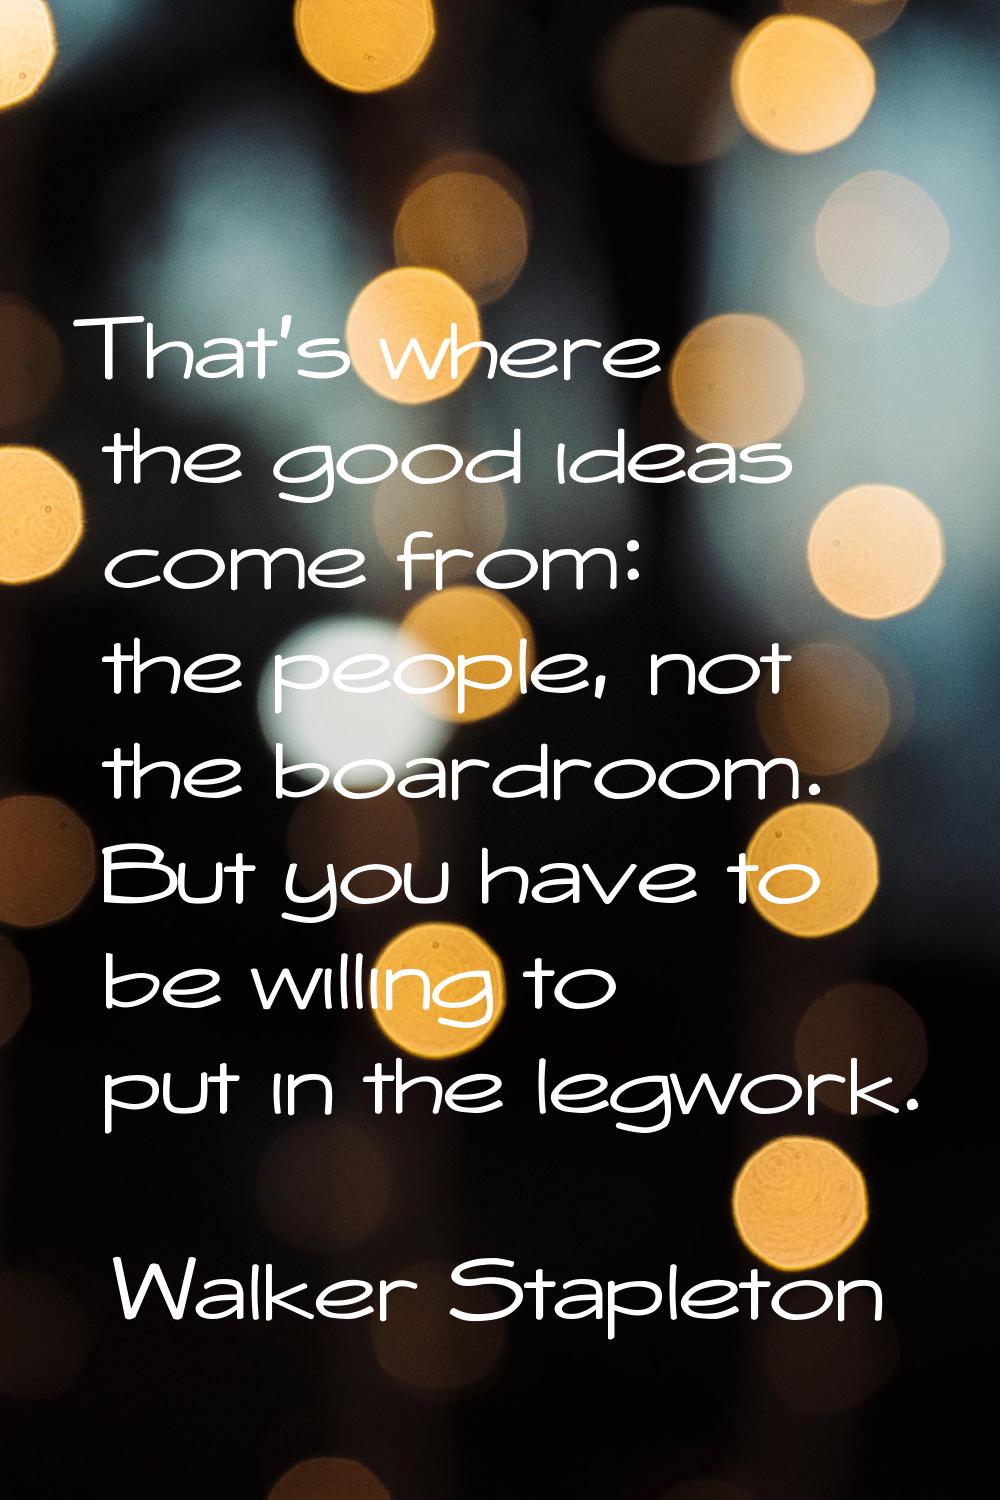 That's where the good ideas come from: the people, not the boardroom. But you have to be willing to